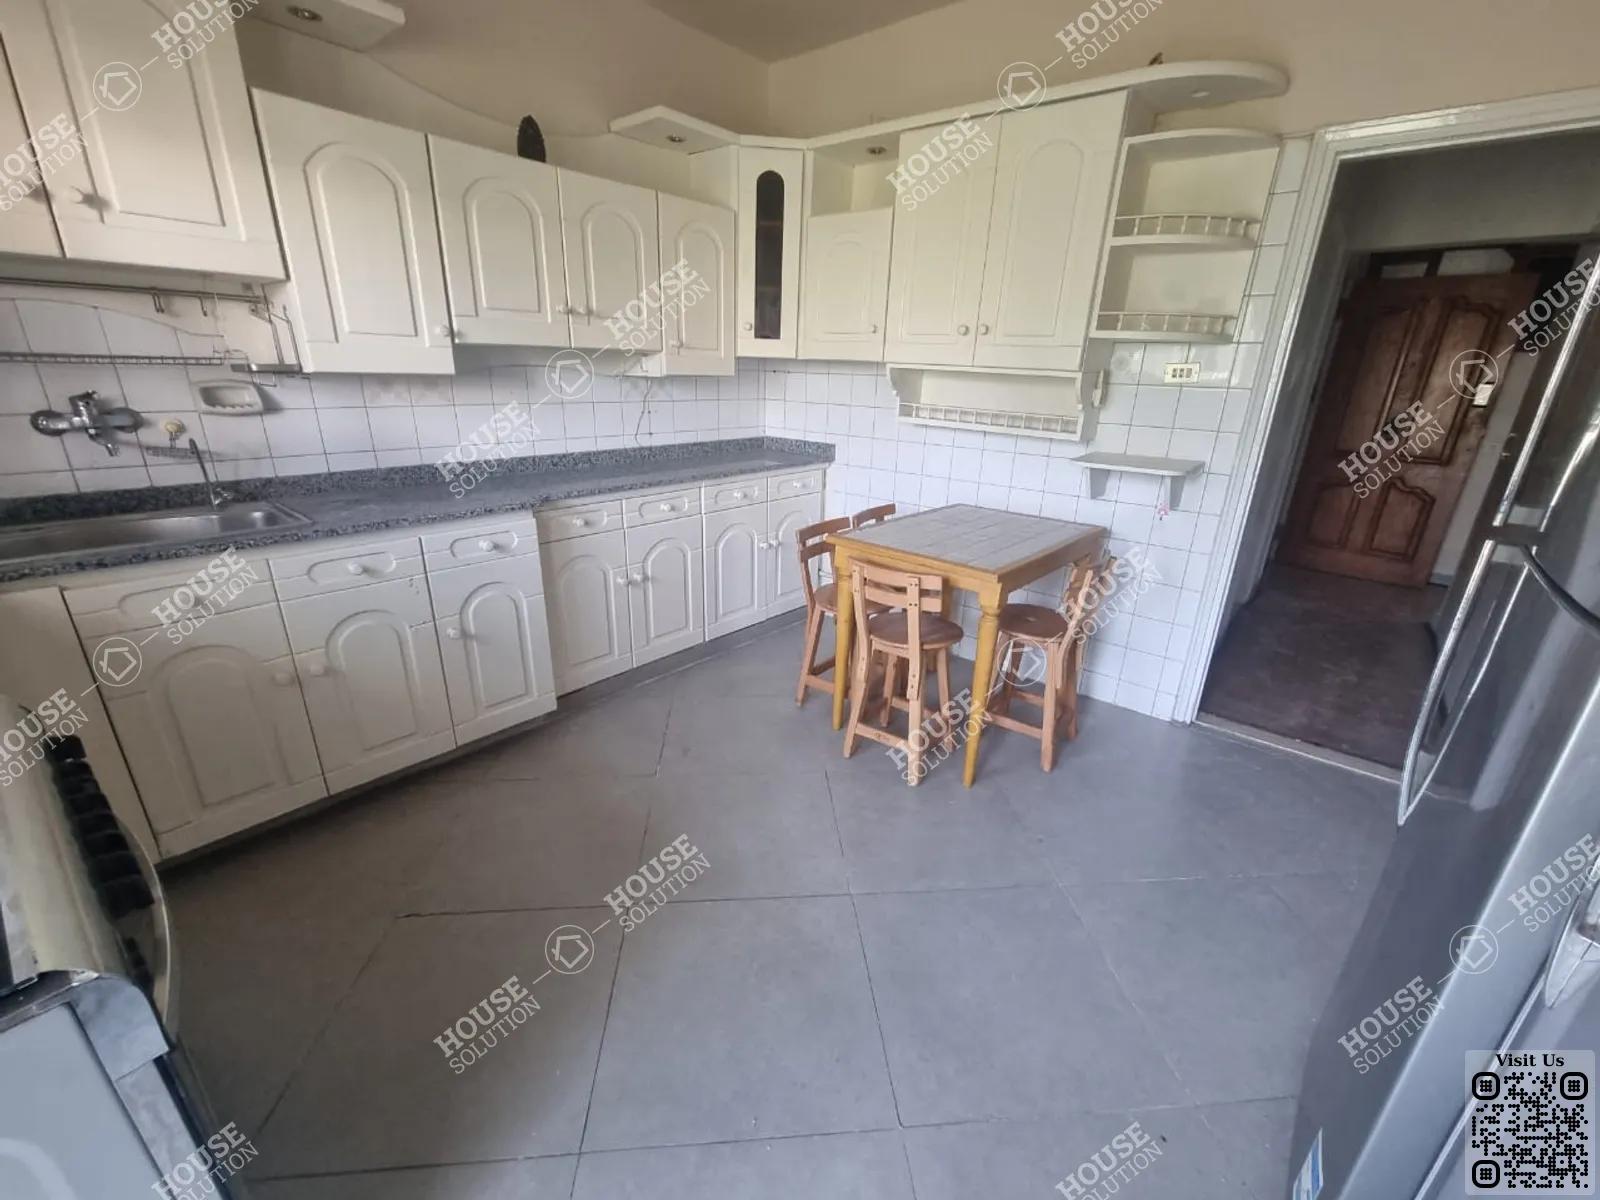 KITCHEN  @ Apartments For Rent In Maadi Maadi Degla Area: 240 m² consists of 4 Bedrooms 4 Bathrooms Modern furnished 5 stars #5717-2